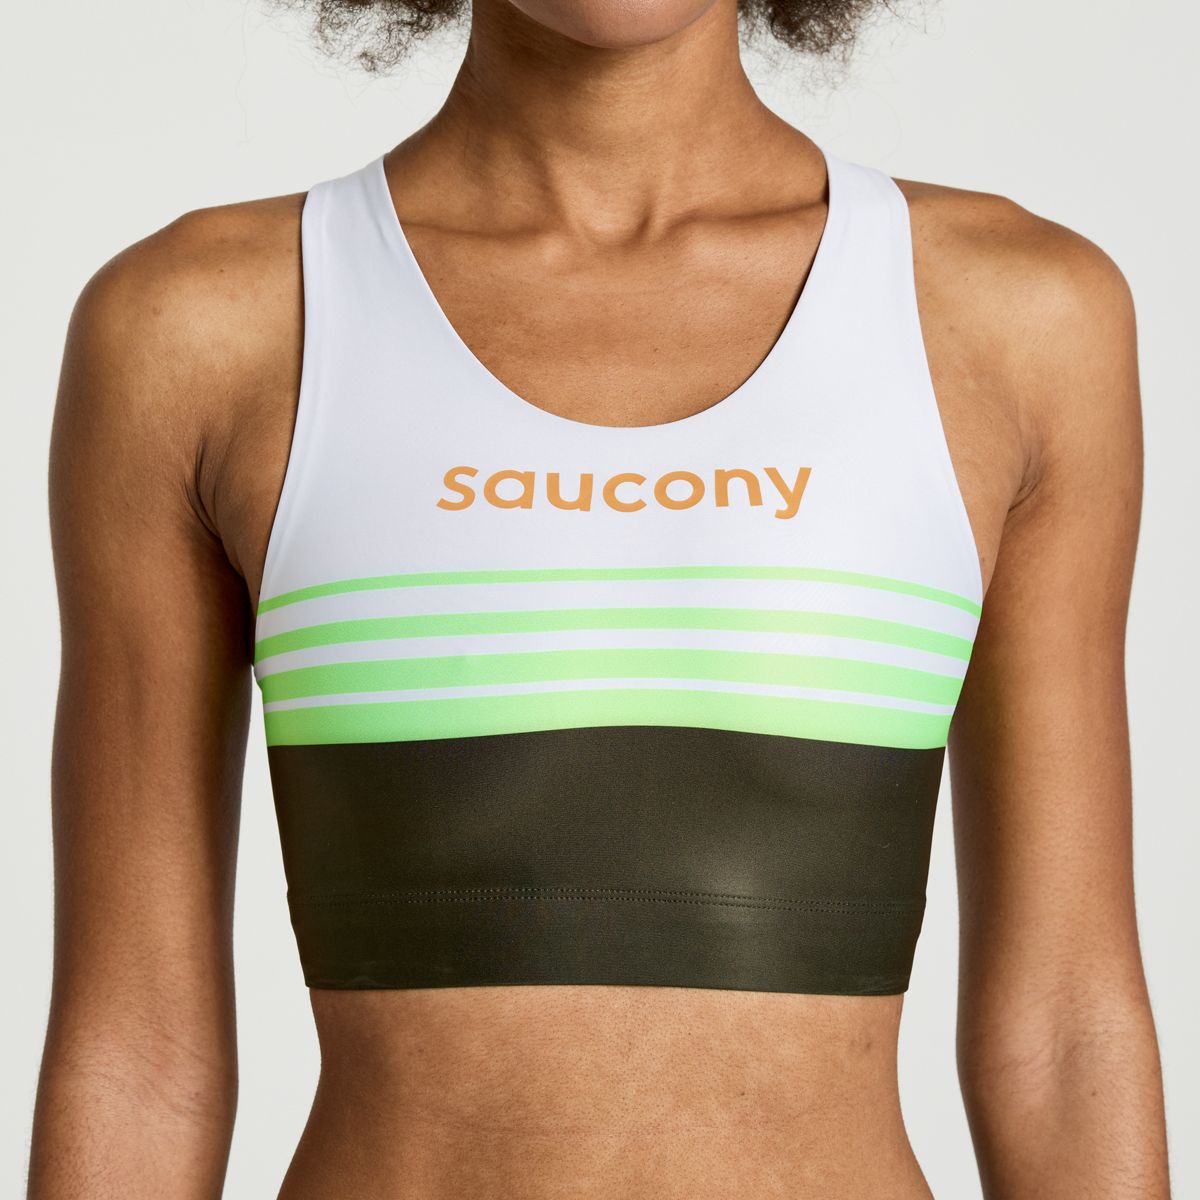 Saucony - Check out our lineup of running bras and trounce the bounce for  summer. The ladies deserve it.